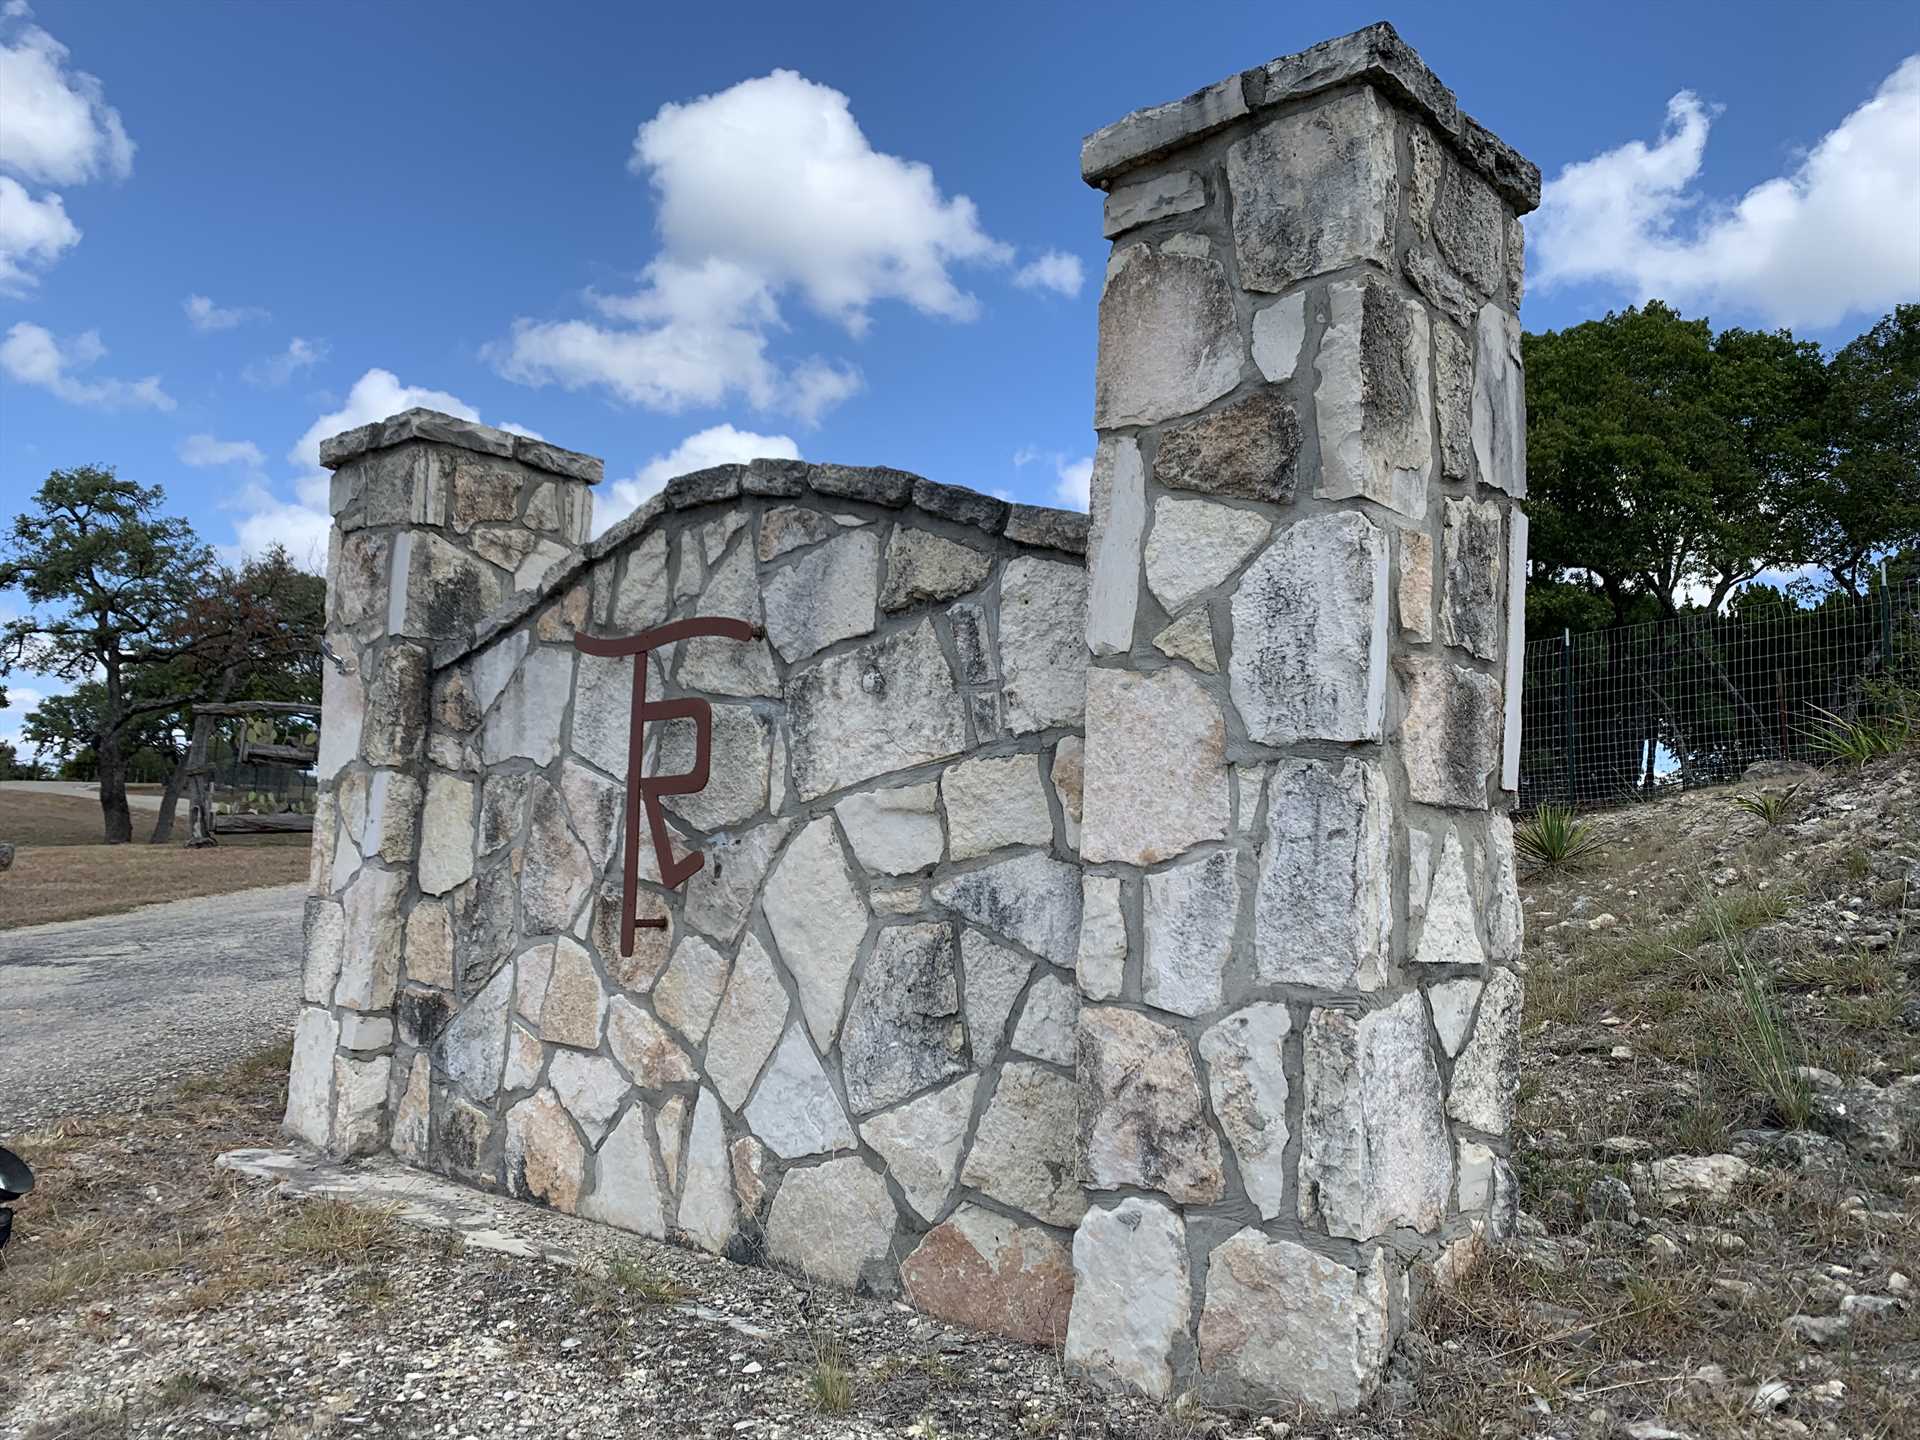                                                 The Tabasco Ranch stone gate is your signal that an amazing Texas Hill Country adventure is about to begin.